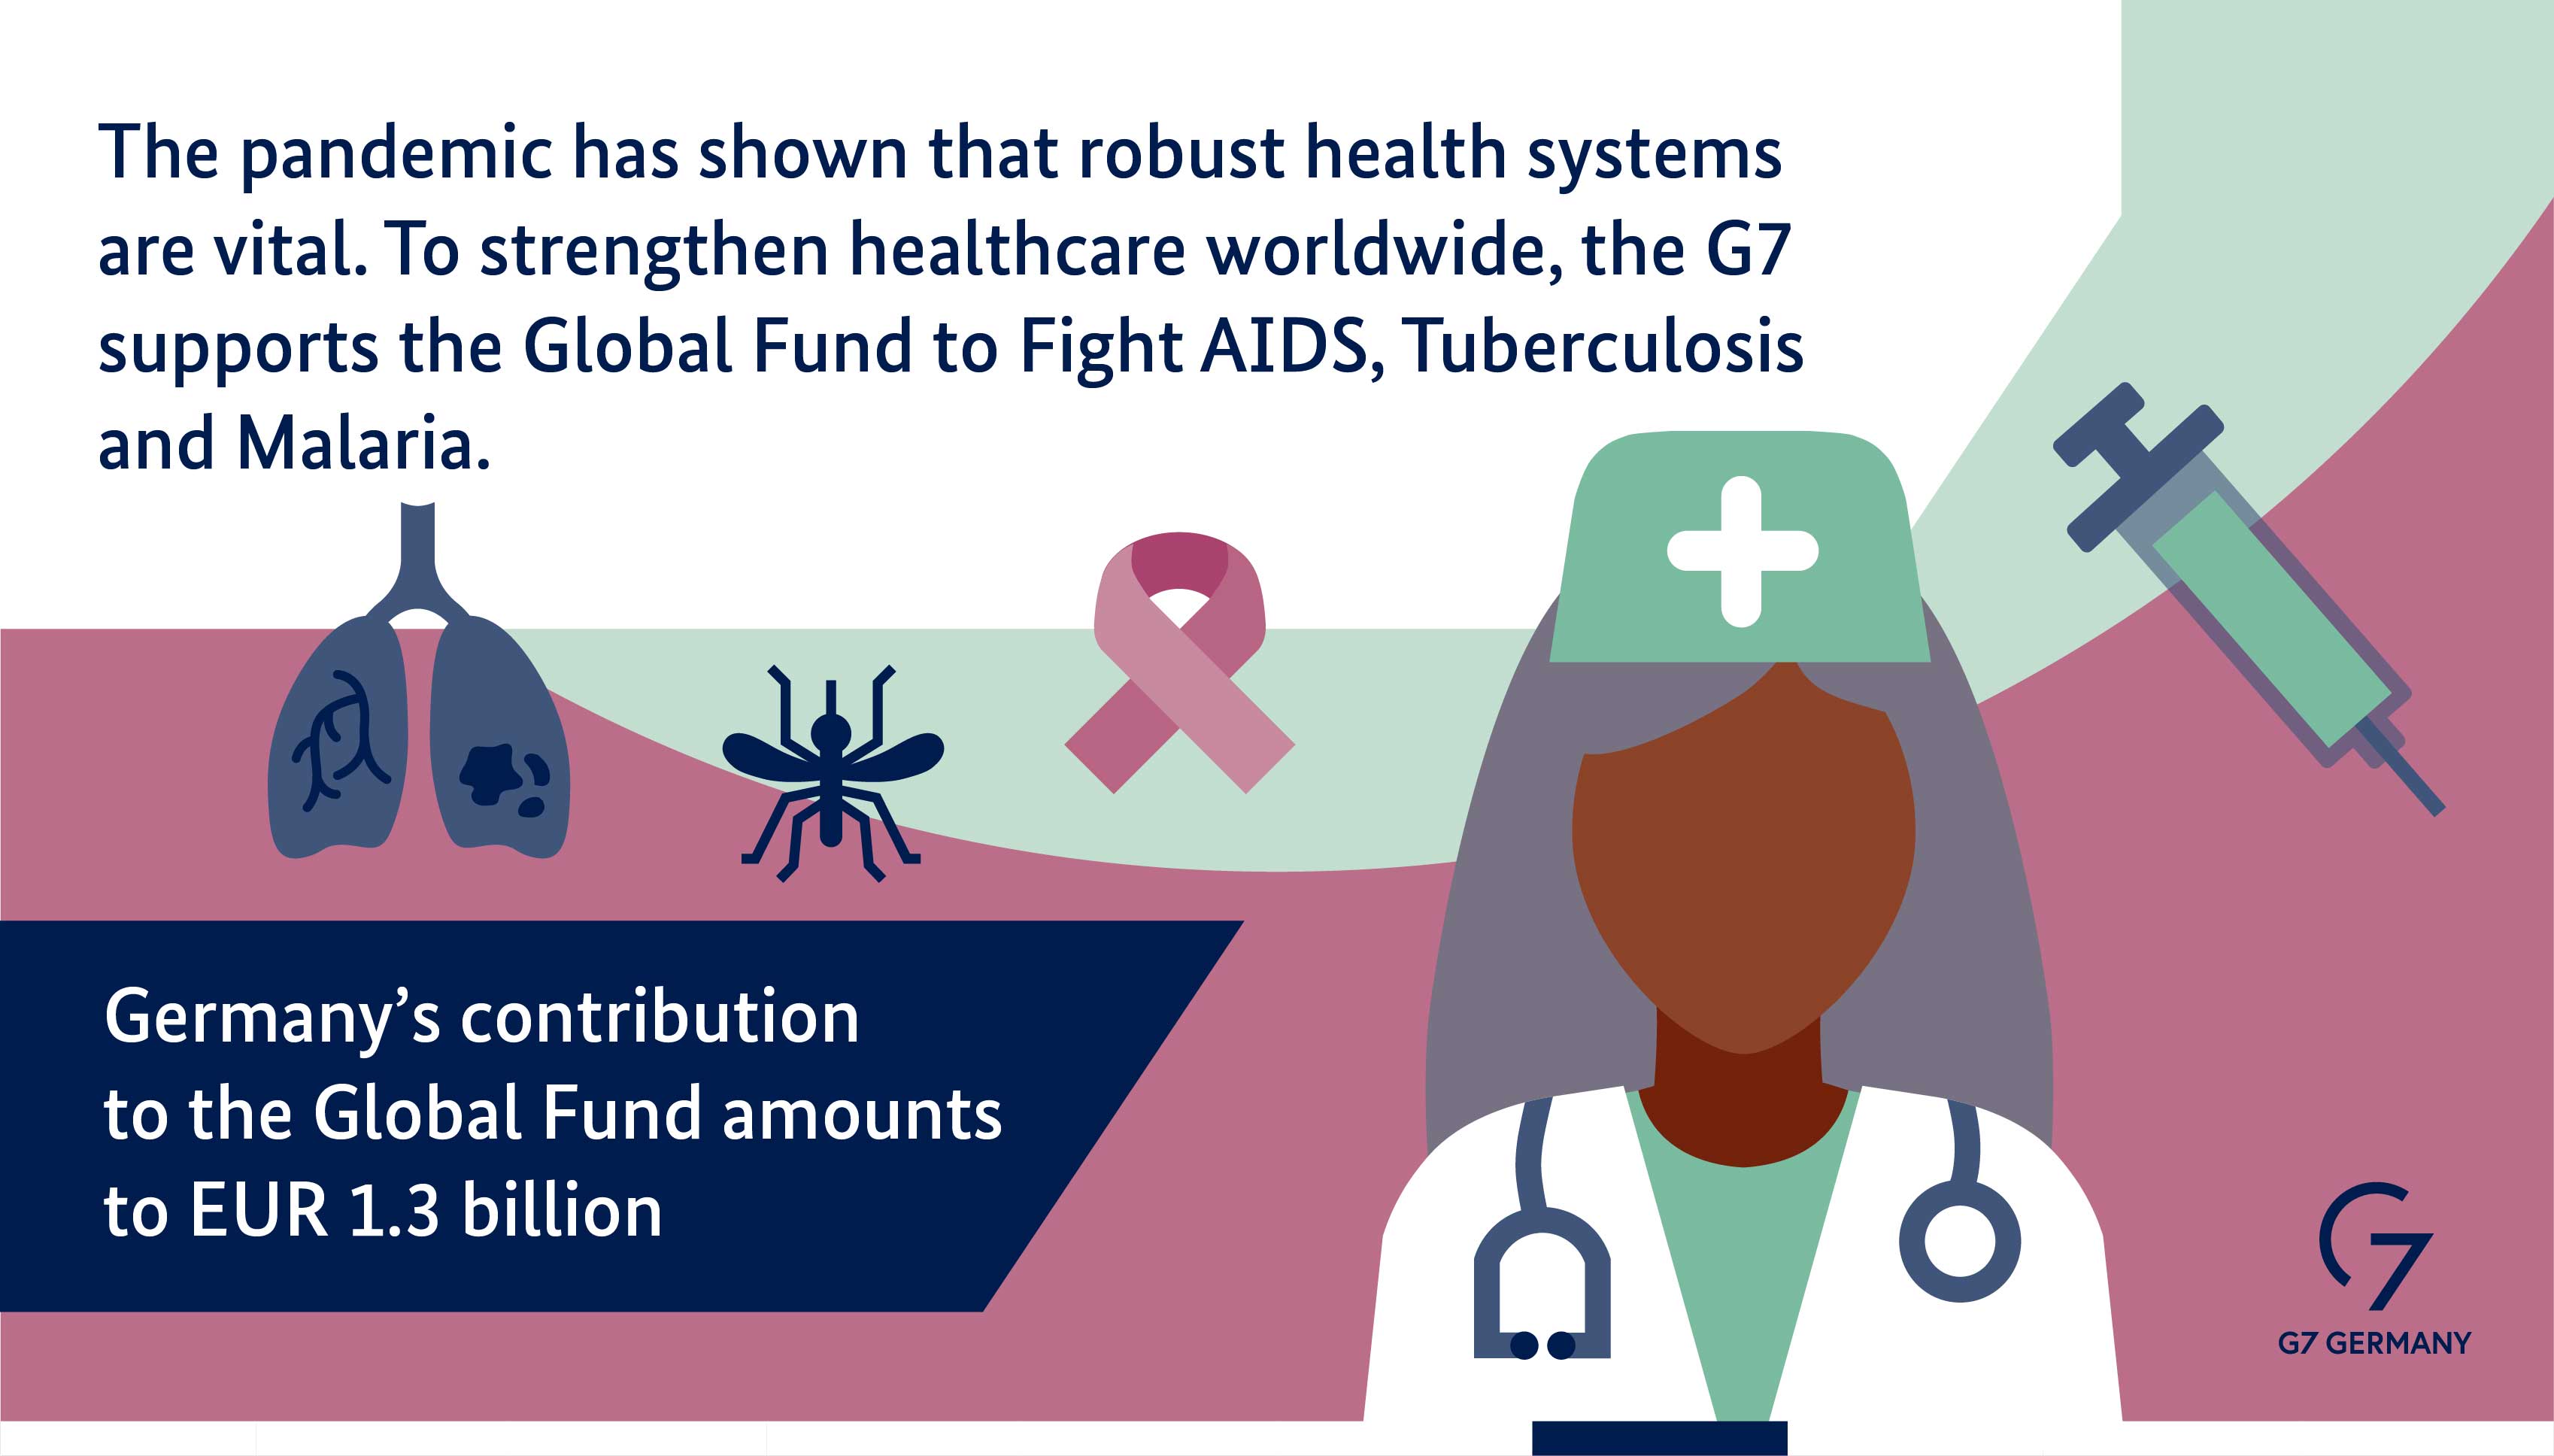 The pandemic has shown that strong health systems are vital. To strengthen health worldwide, the G7 supports the Global Fund to Fight AIDS, Tuberculosis and Malaria. Germany's contribution to this: 1.3 billion euros